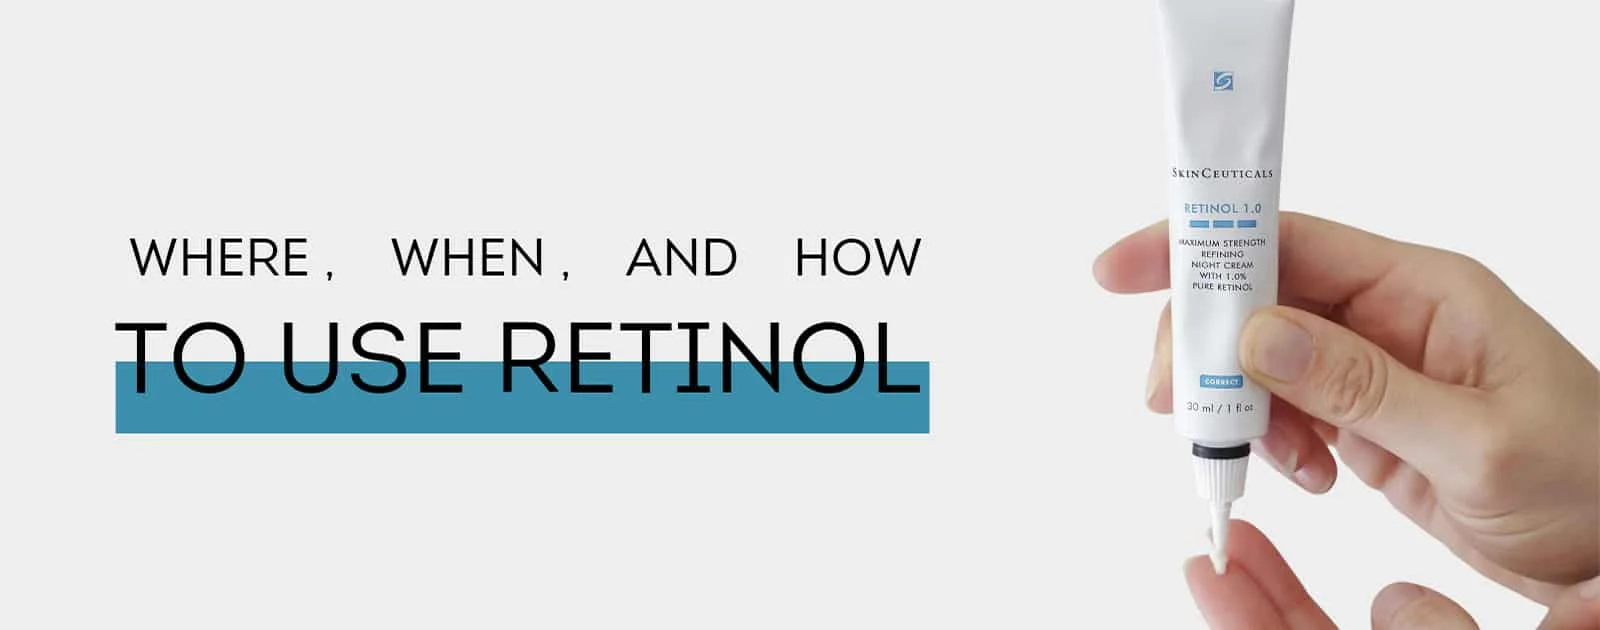 Why Retinol Should Be a Part of Your Skincare Routine in Your 20s